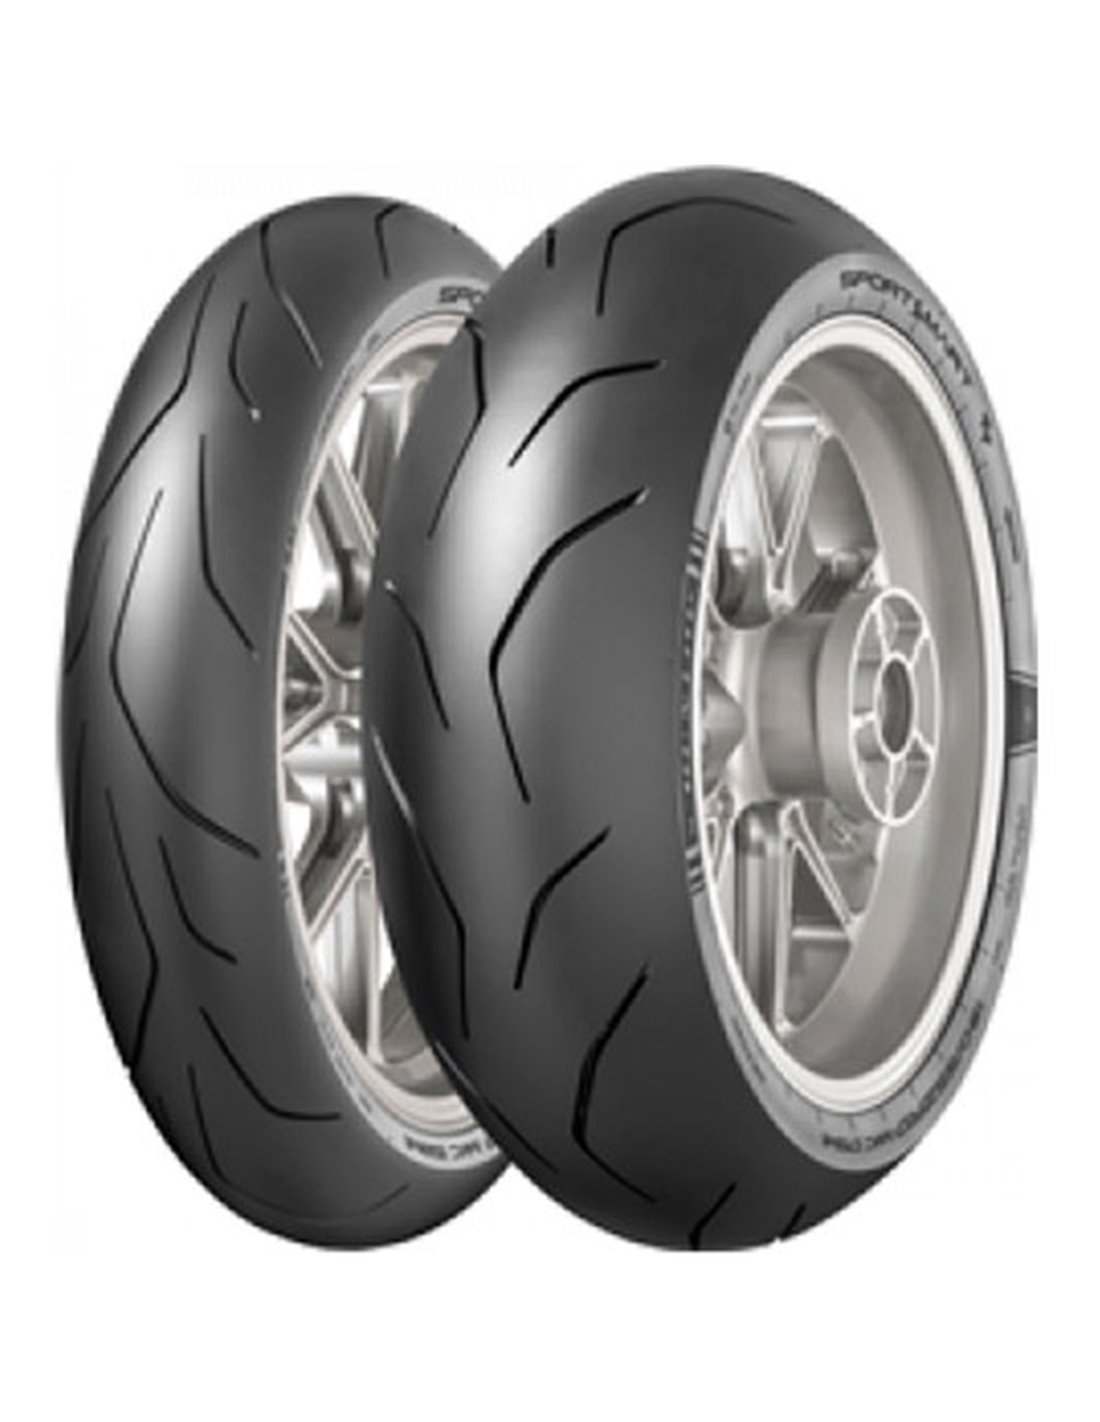 Dunlop D213 GP Pro - Tyre reviews and ratings